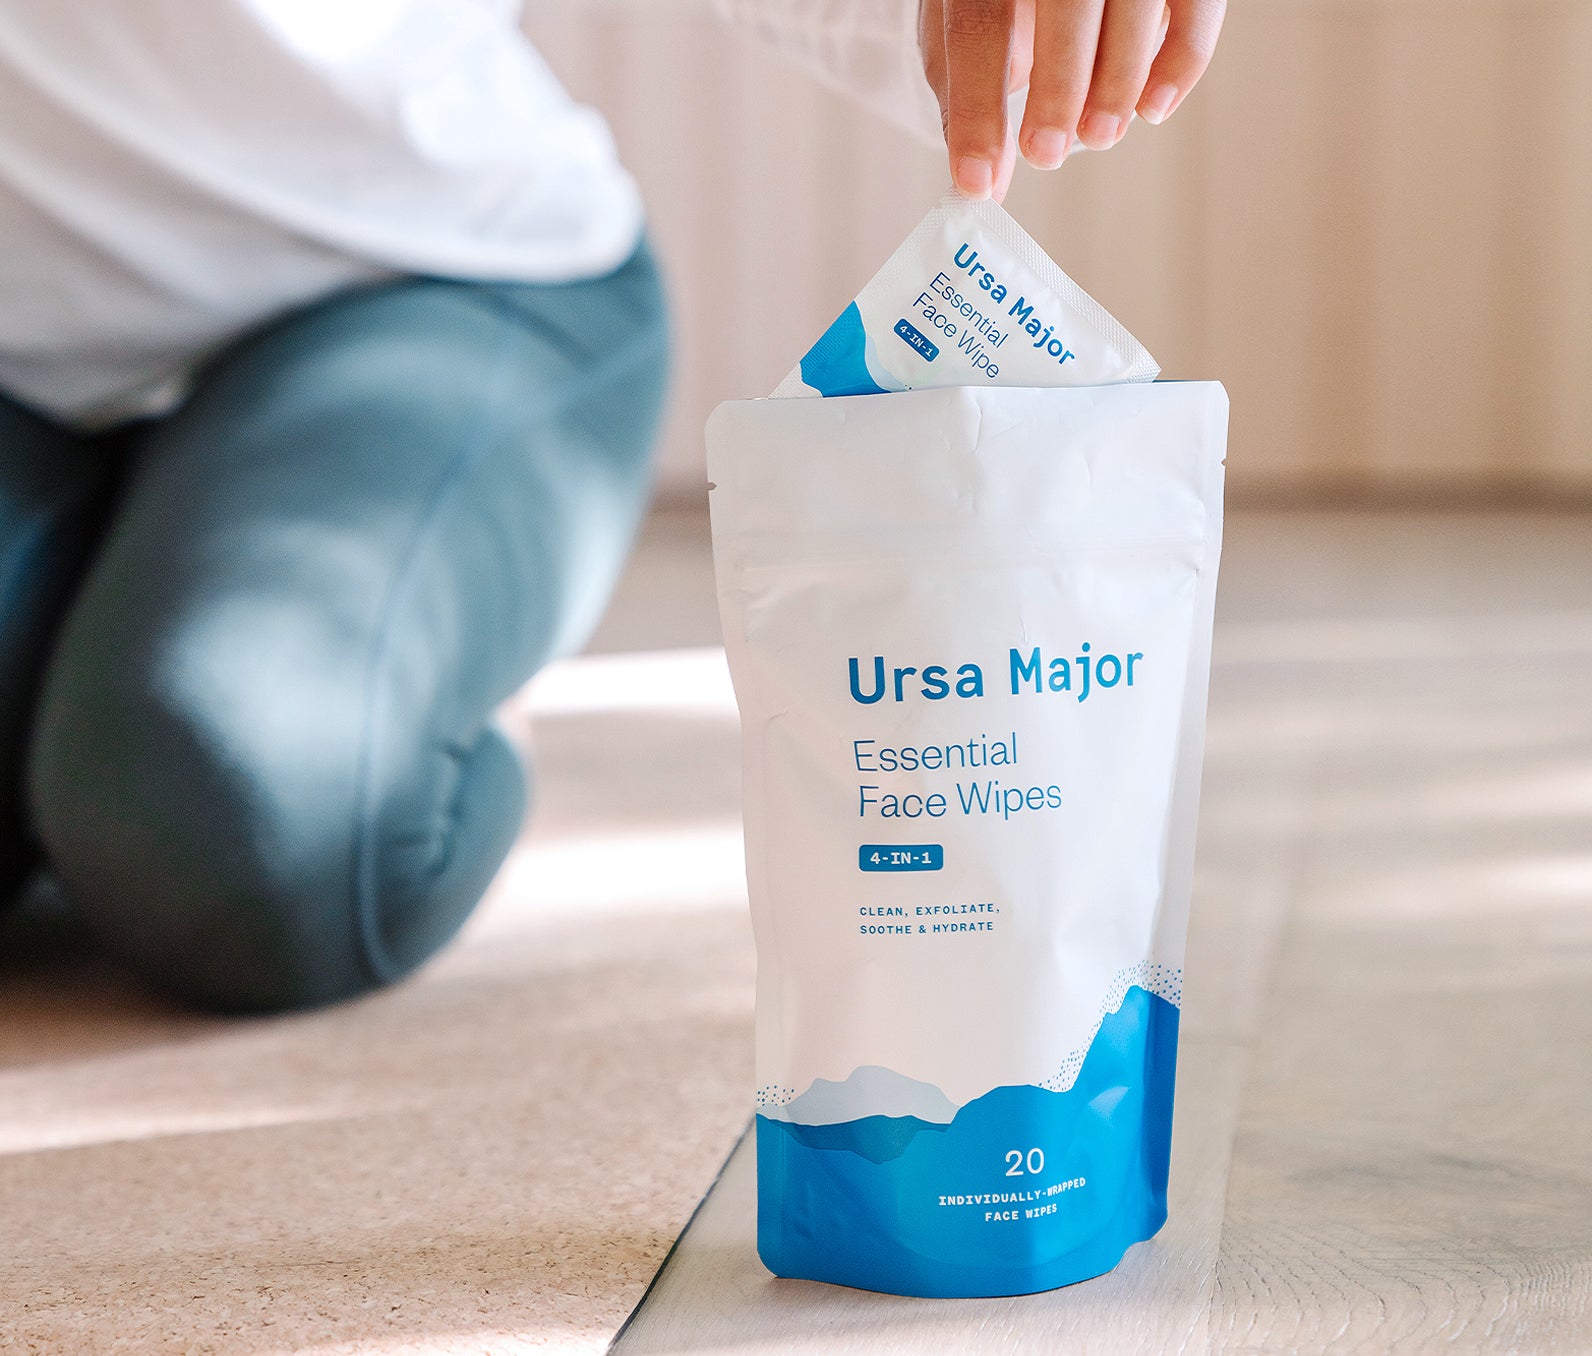 Person pulling pocket-sized Ursa Major face wipes from a package of 20 individually-wrapped wipes.